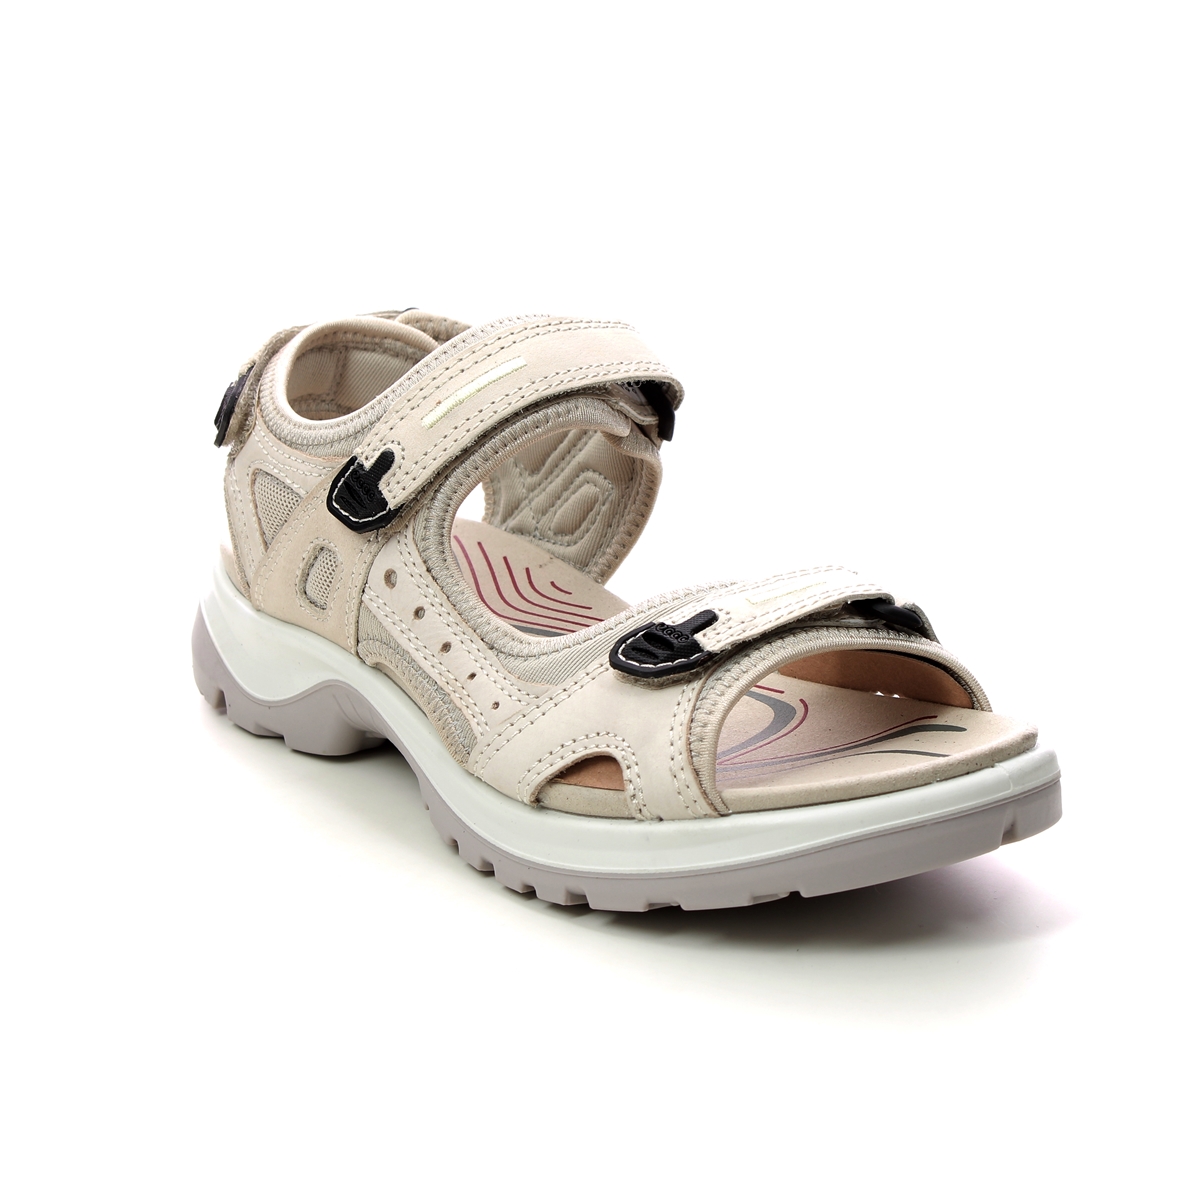 ECCO Offroad Lady Light taupe Womens Walking Sandals 069563-01378 in a Plain Leather in Size 40